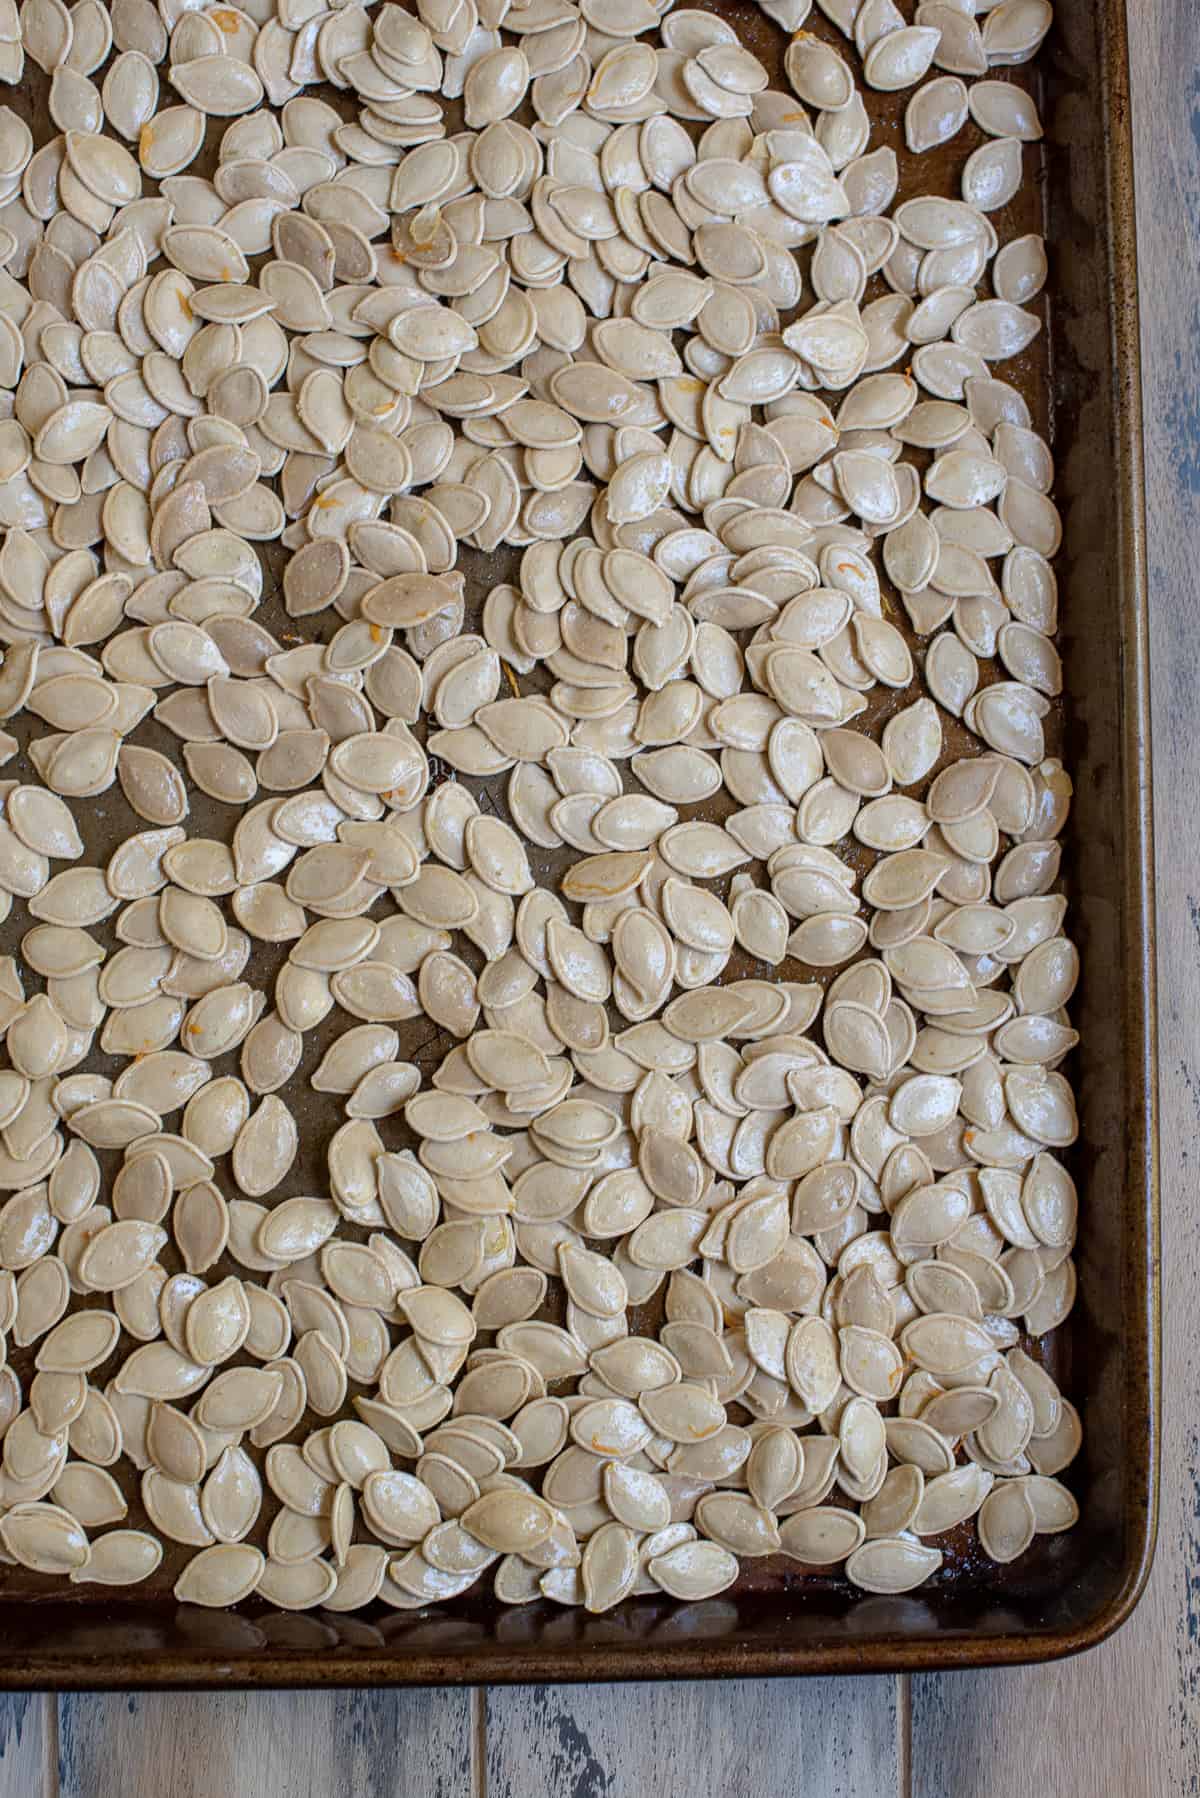 The rinsed seeds are transferred to a baking sheet to dry overnight.